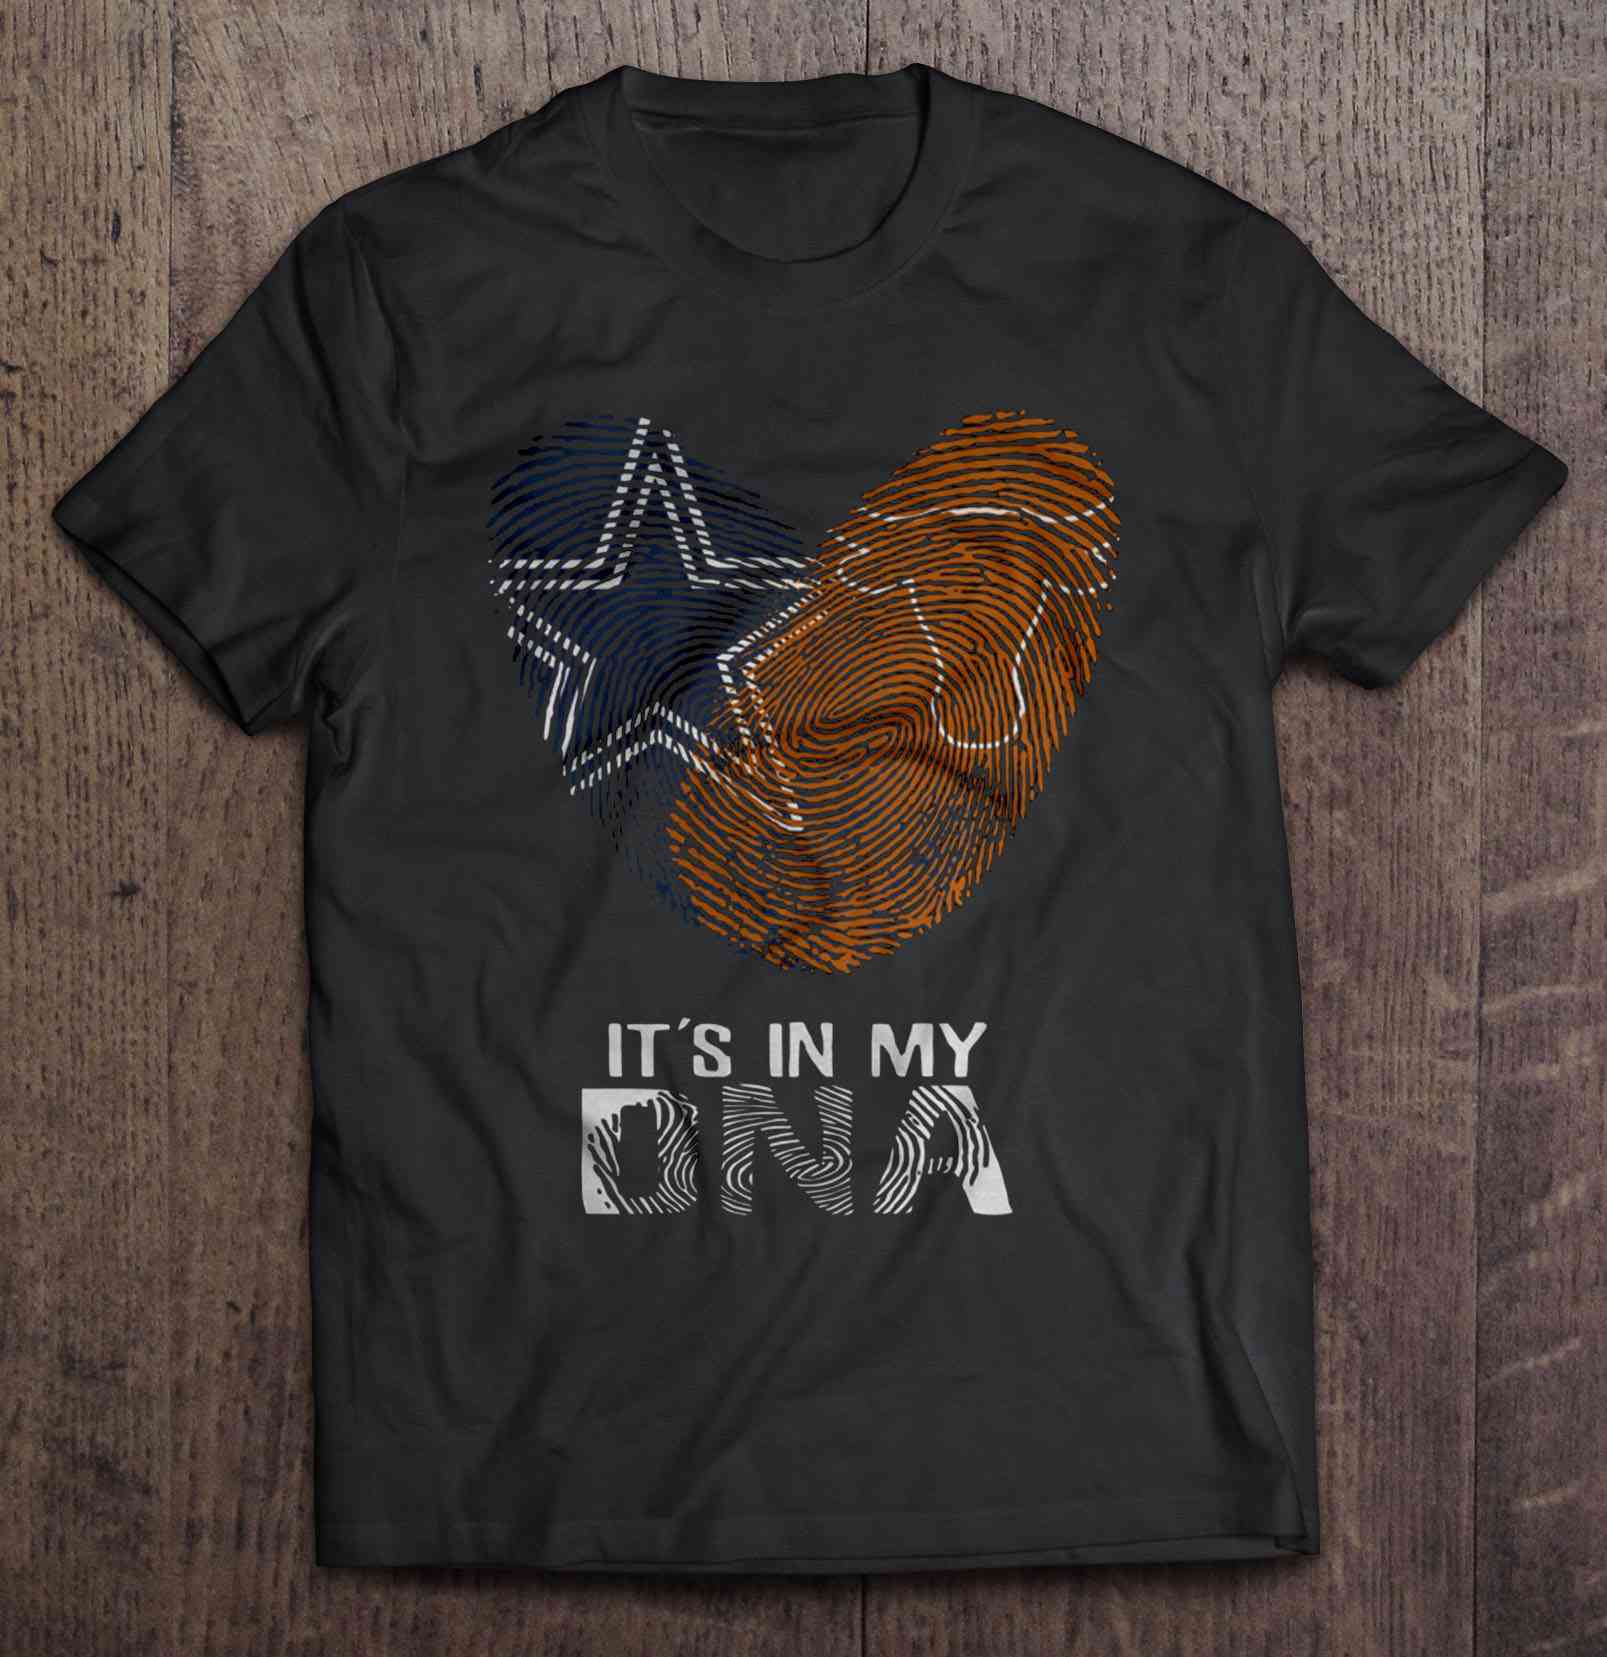 Dallas Cowboys And Texas Longhorns It’s In My DNA